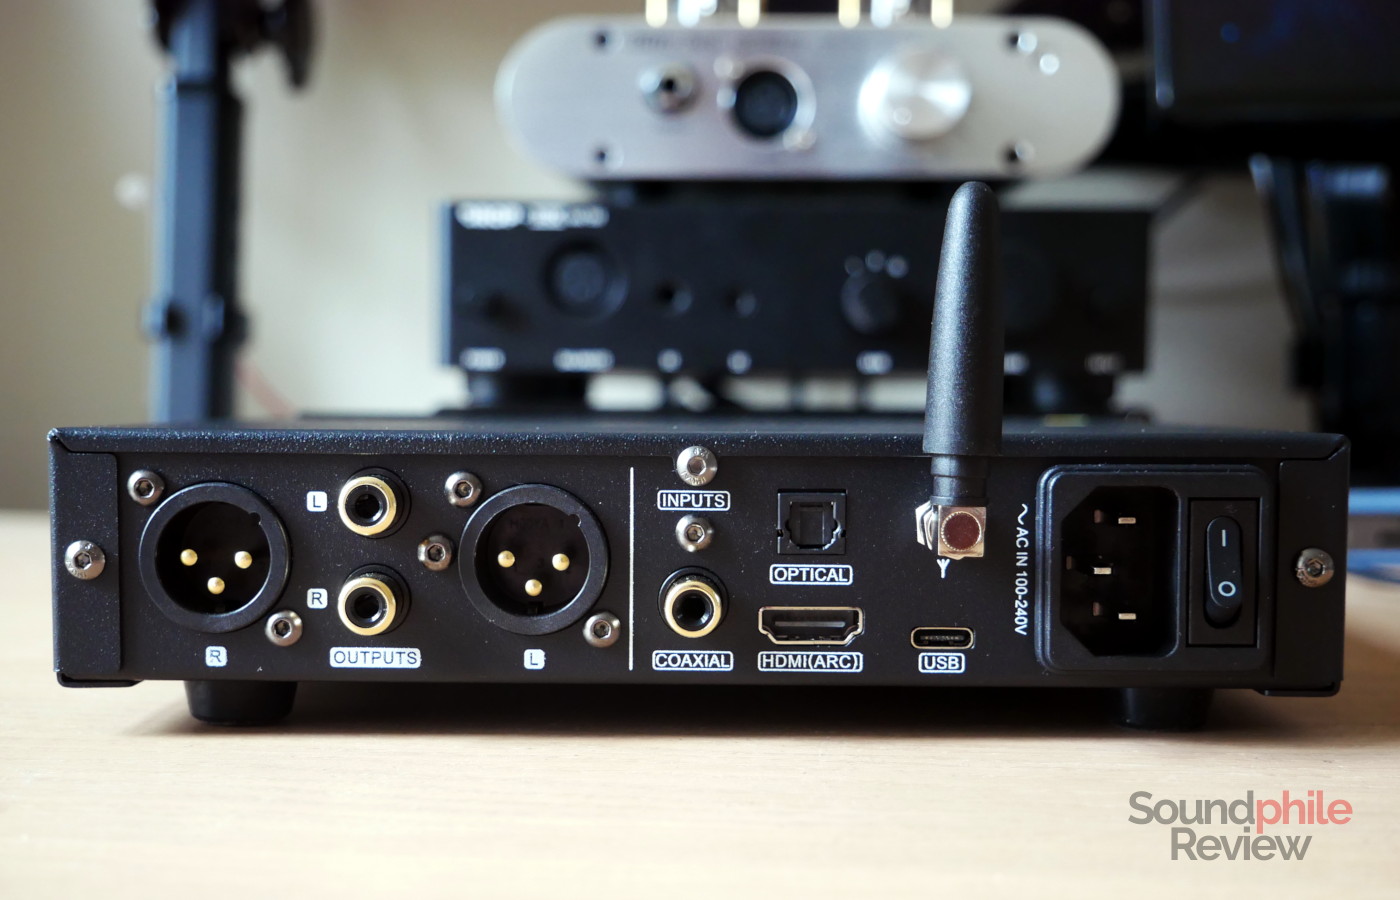 The SMSL DO200 Pro has all outputs on the back side